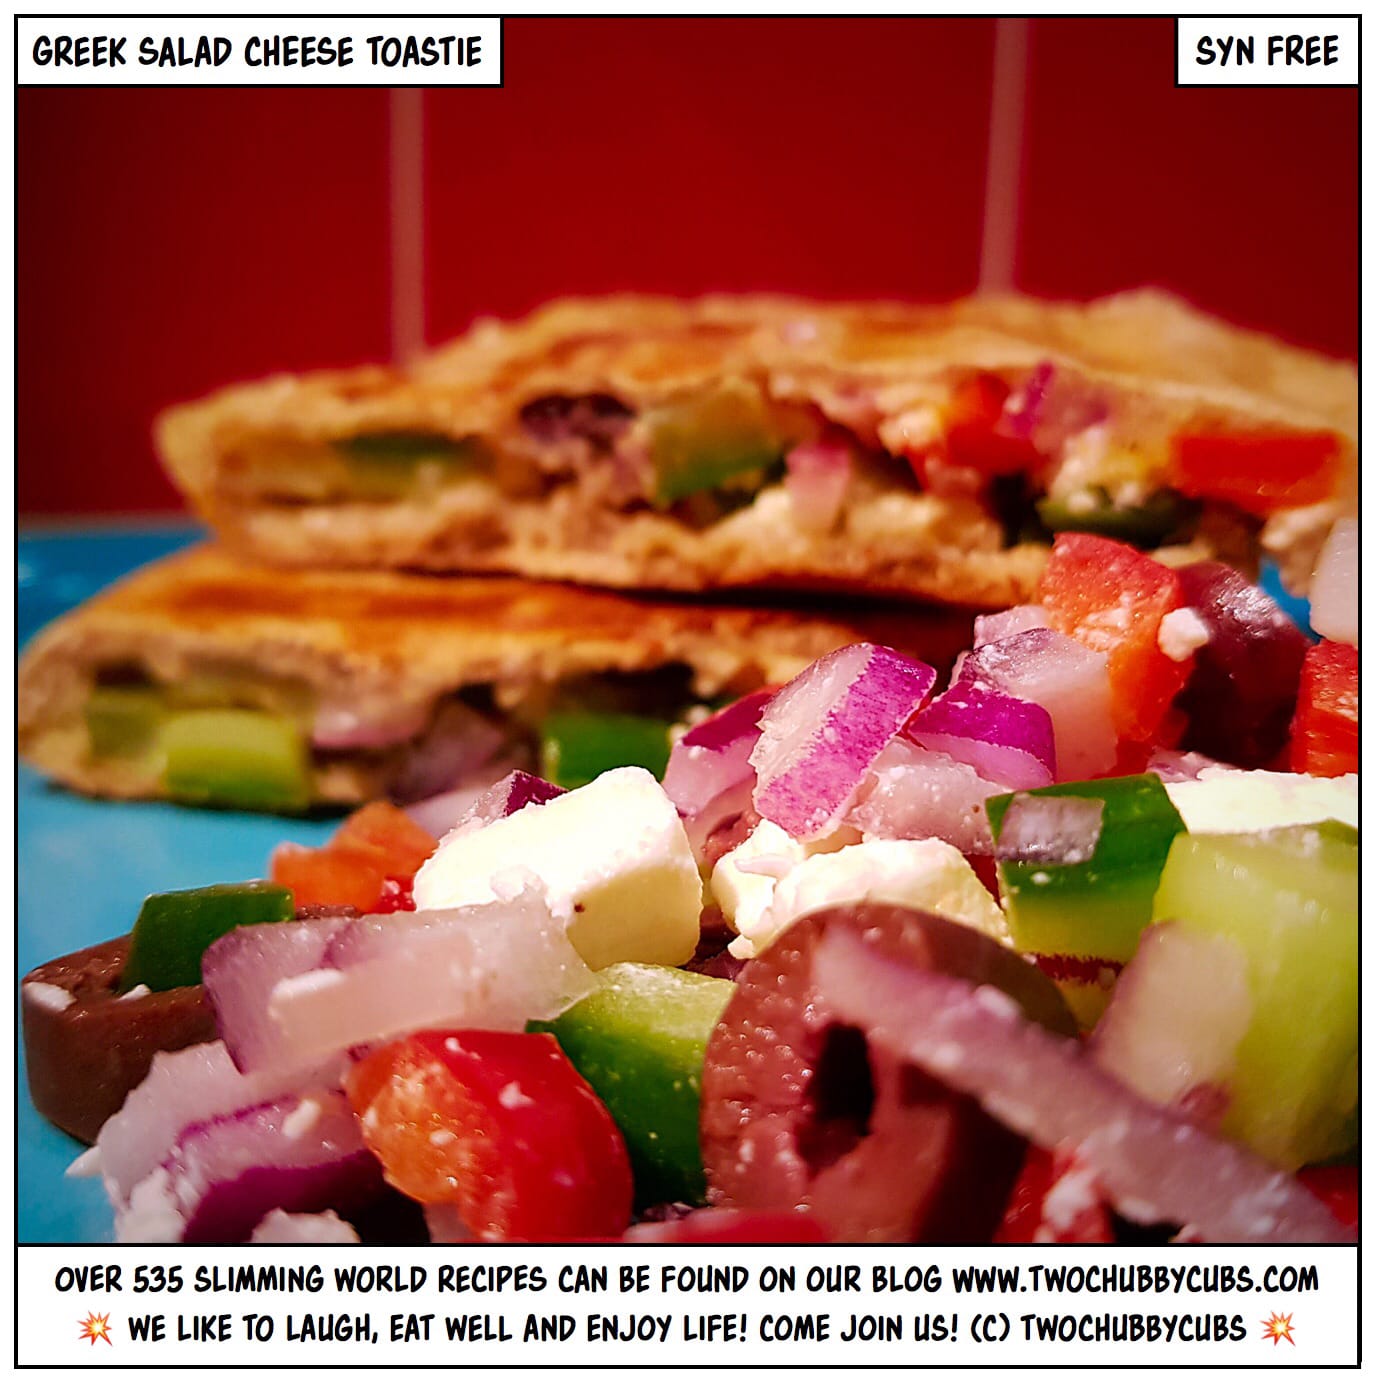 greek salad cheese toastie: syn free snacking twochubbycubs